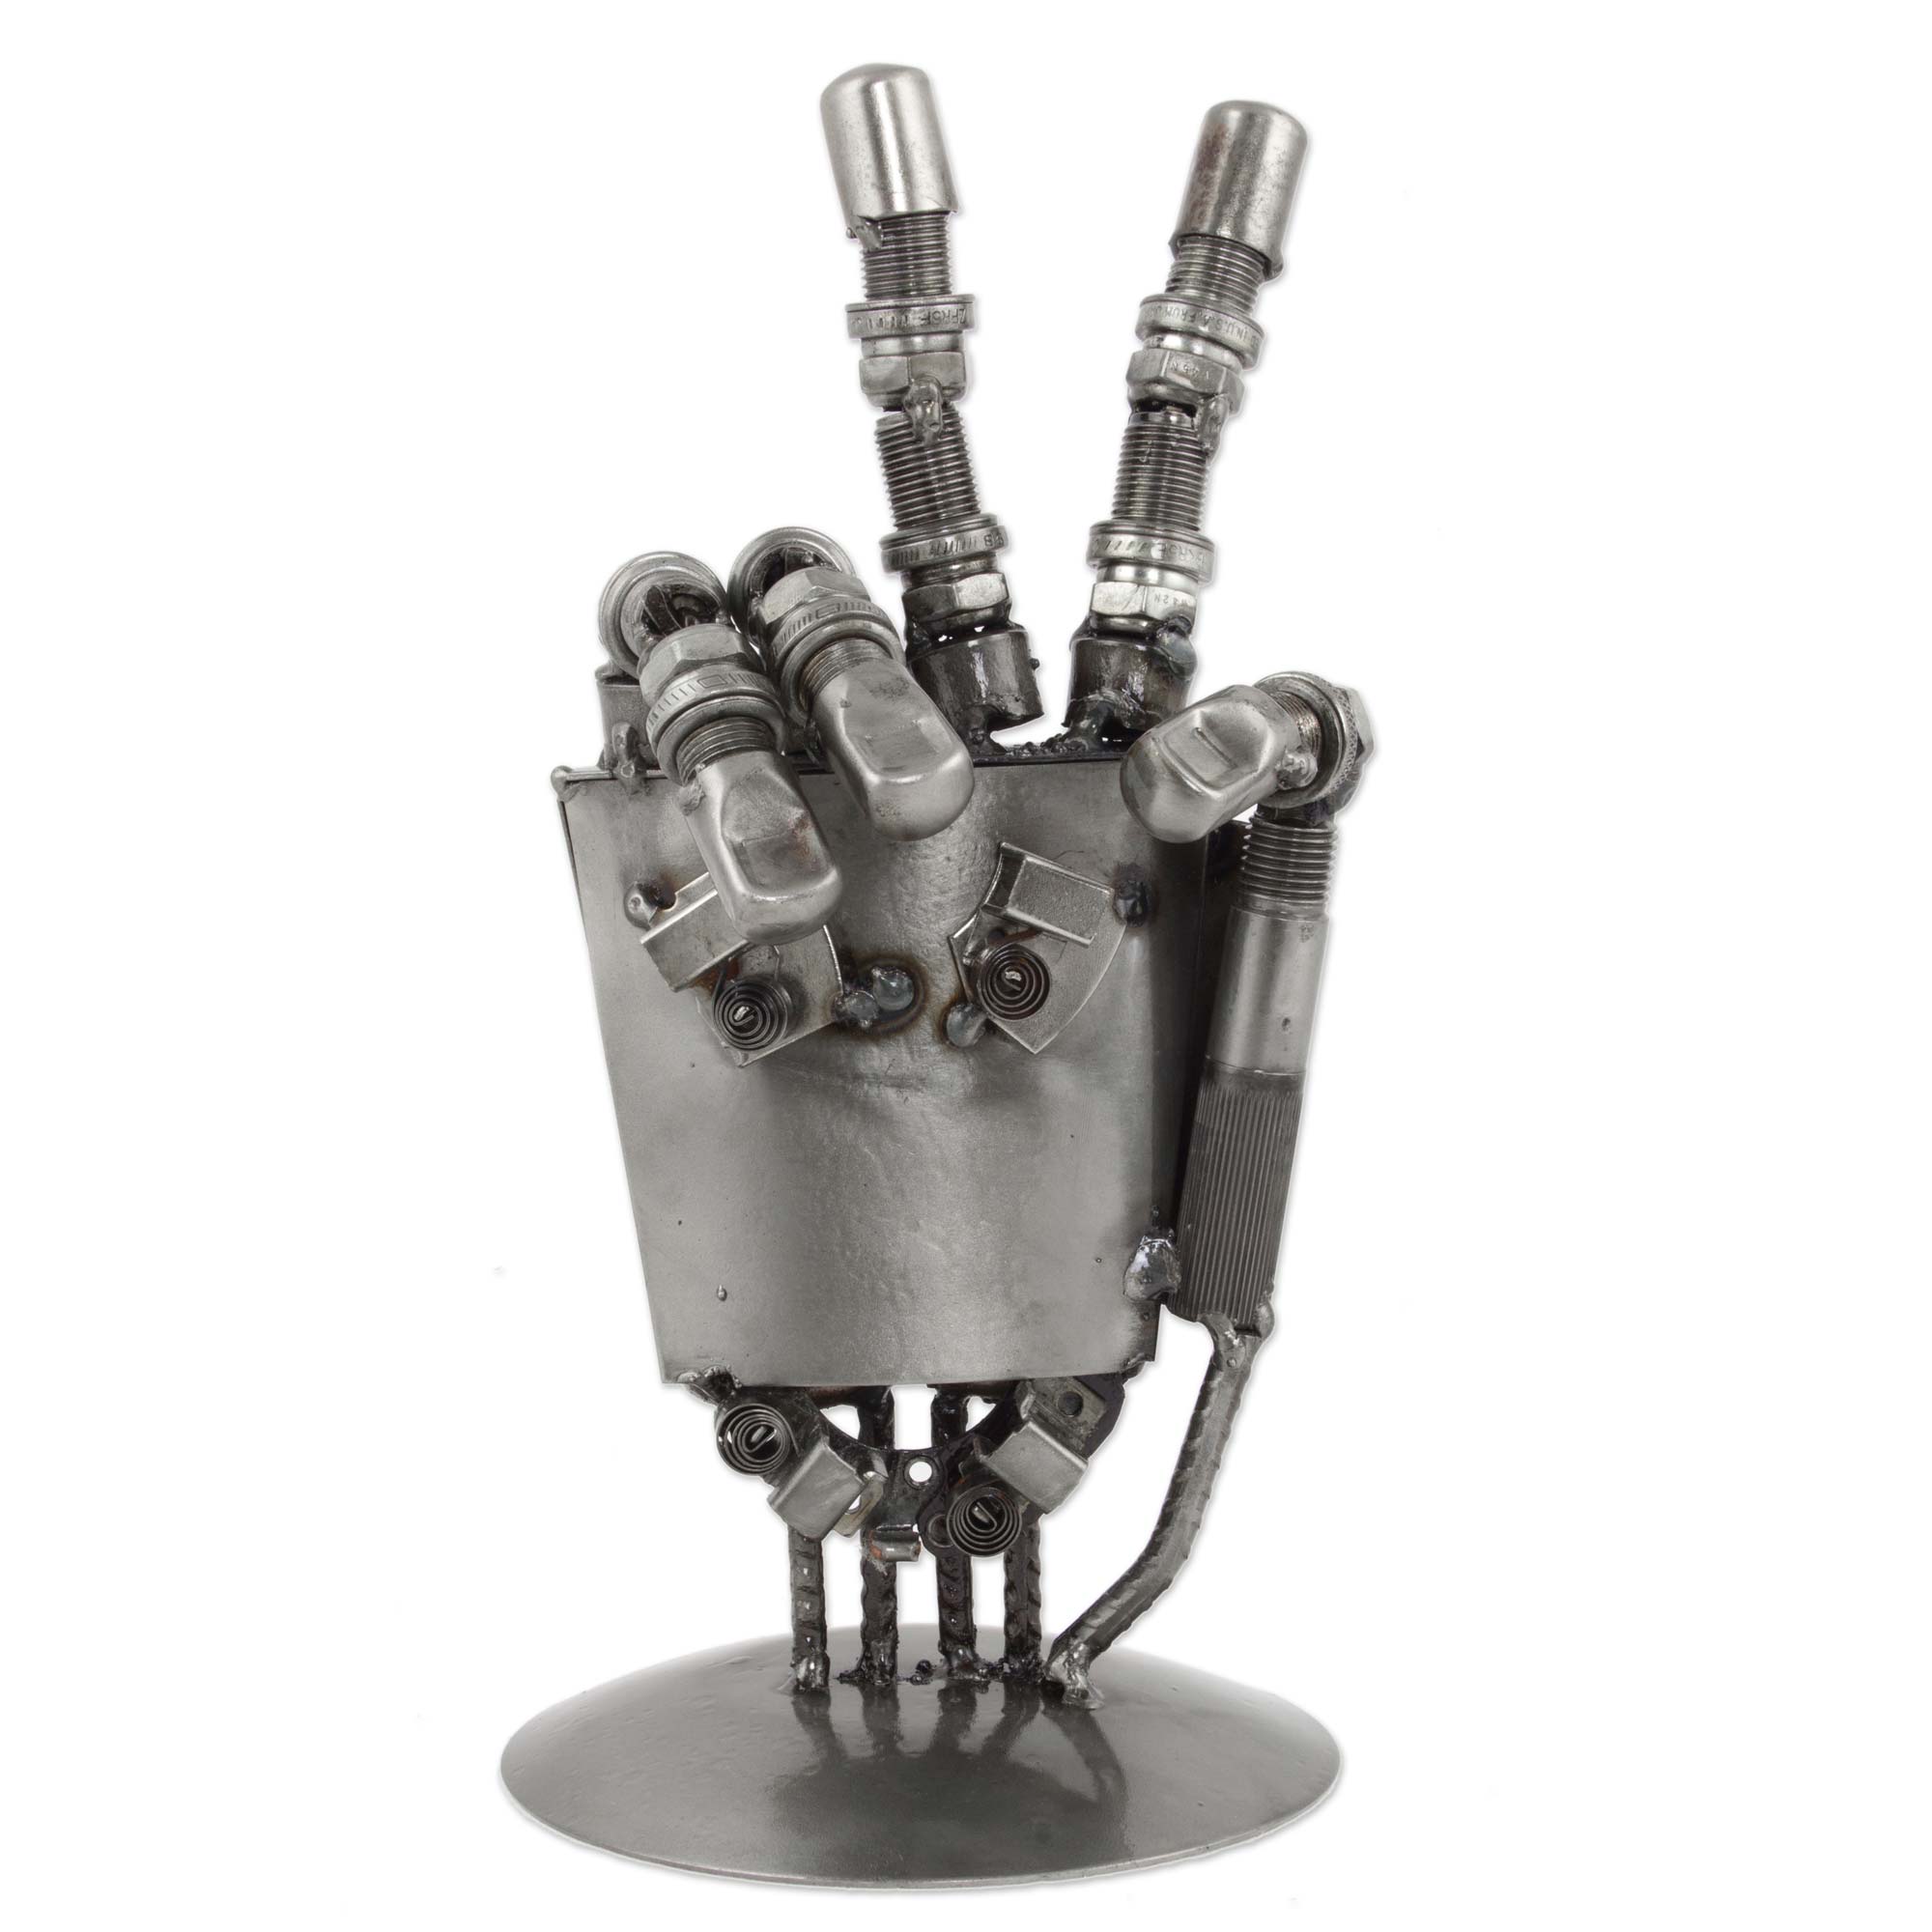 Mexico Handcrafted Recycled Metal Sculpture - Rustic Robot Hand | NOVICA